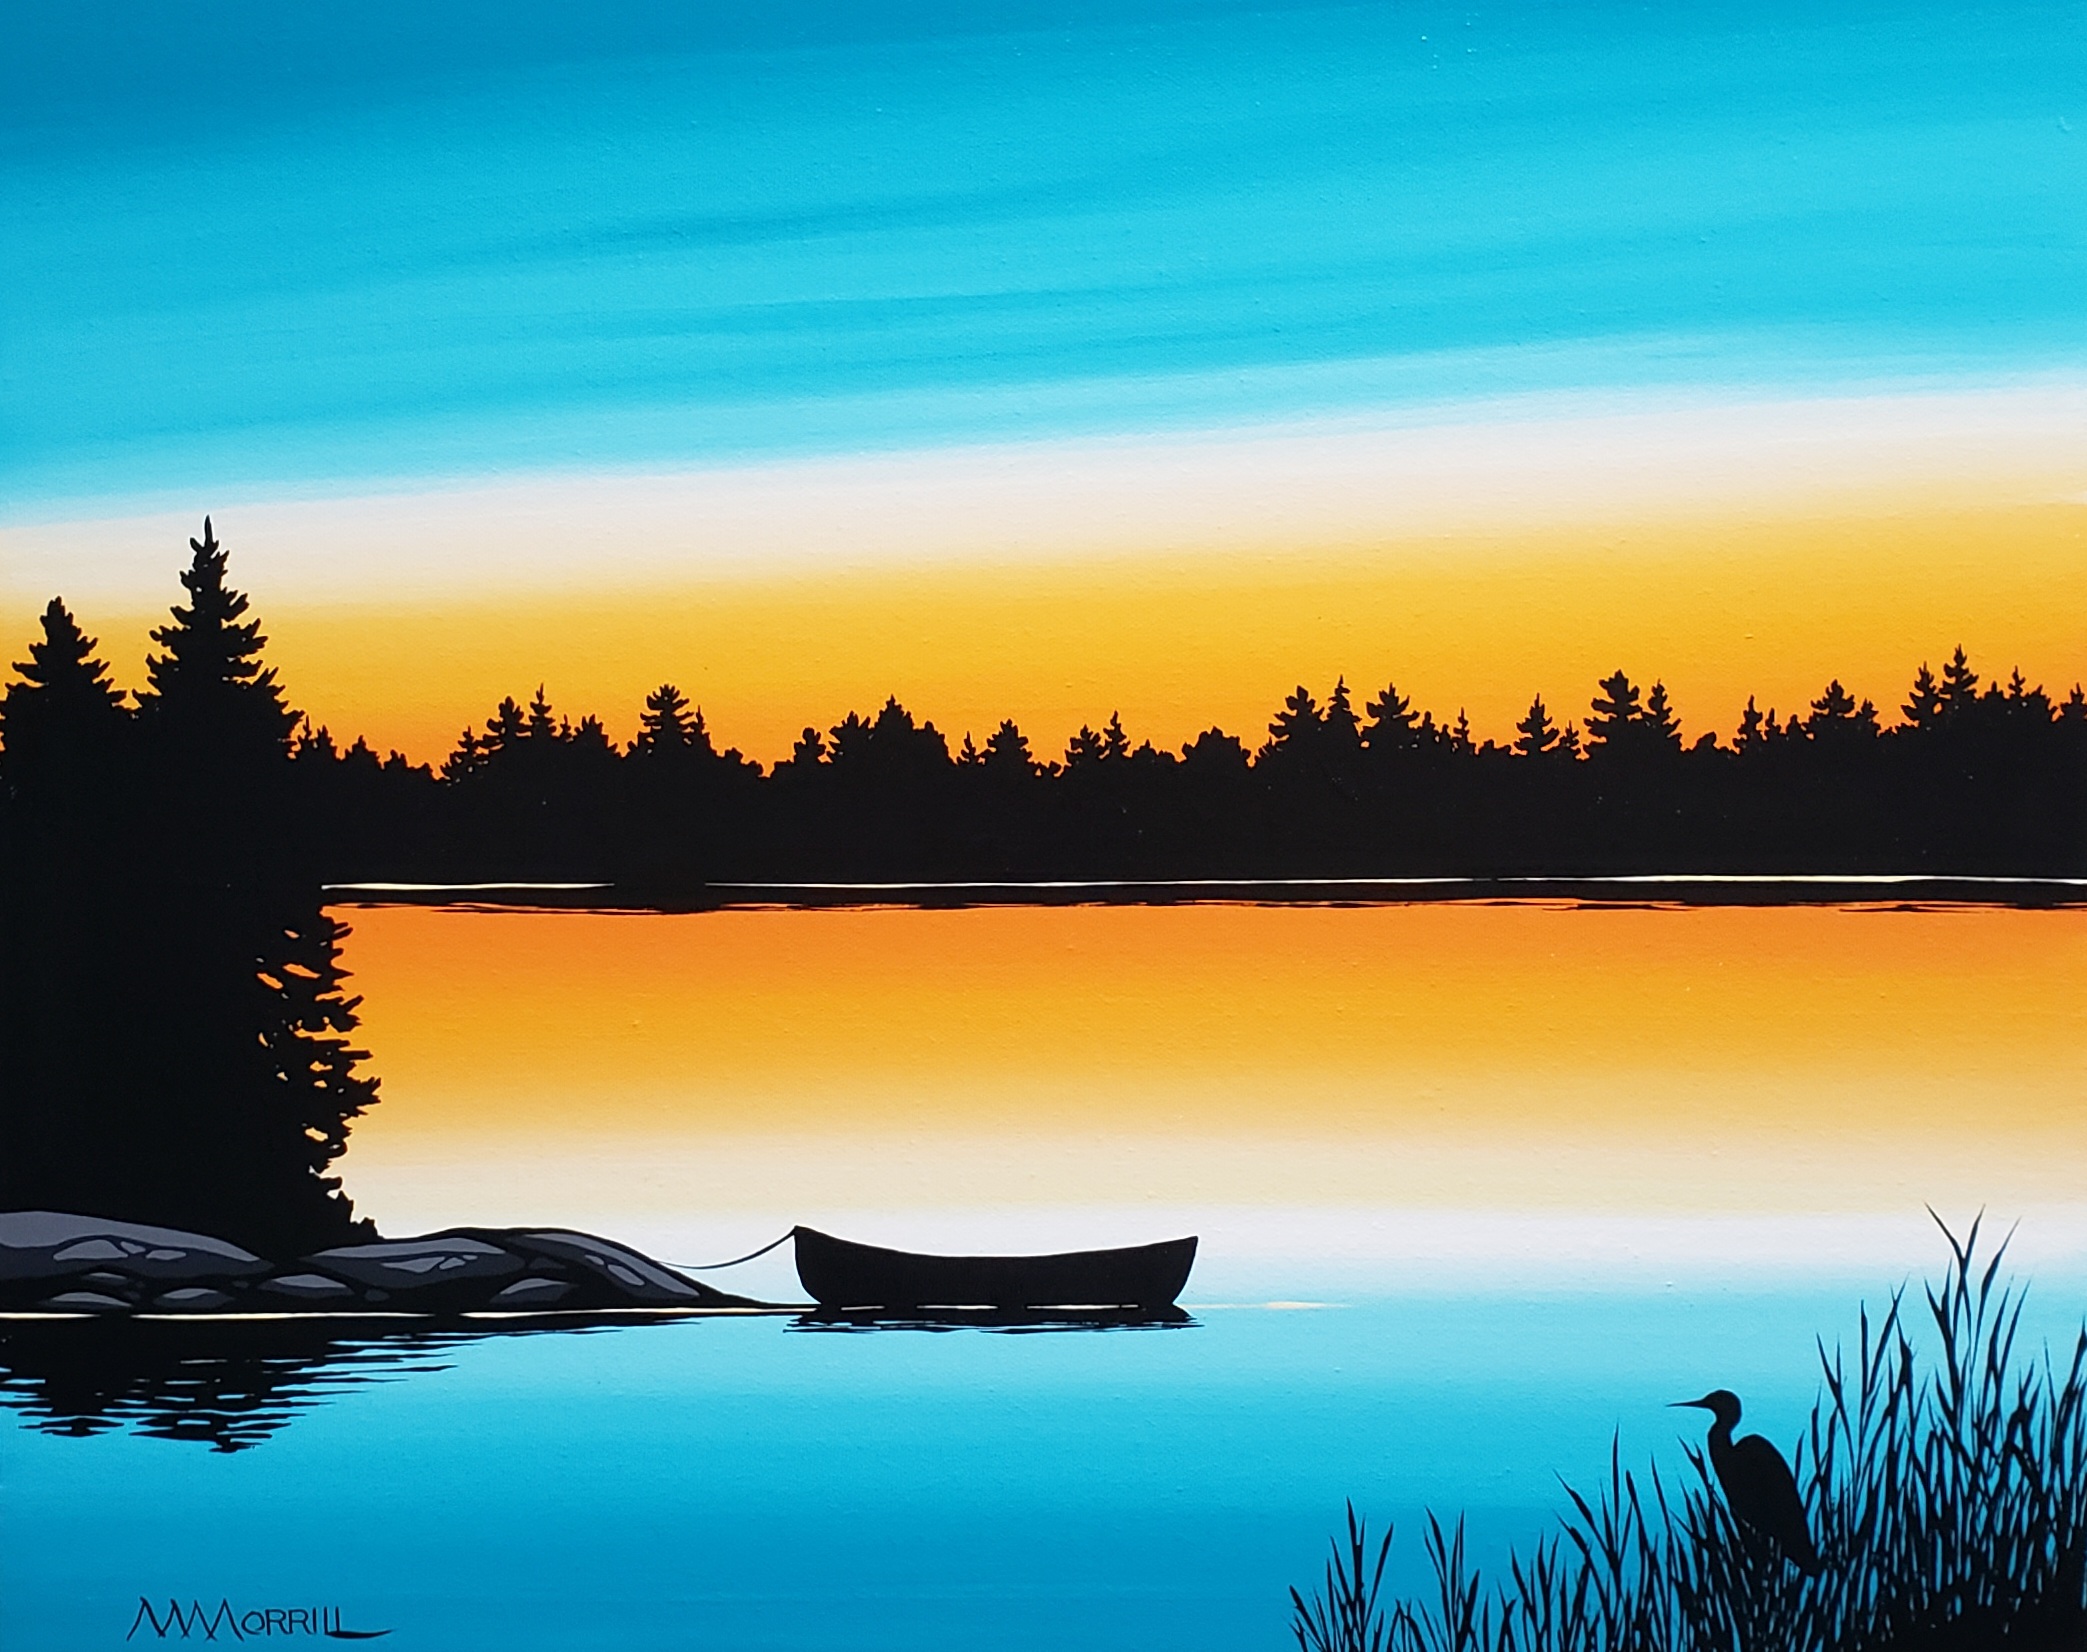 A Restful Evening III, original summer lake sunset painting with a canoe by Monica Morrill at Effusion Art Gallery in Invermere, BC.